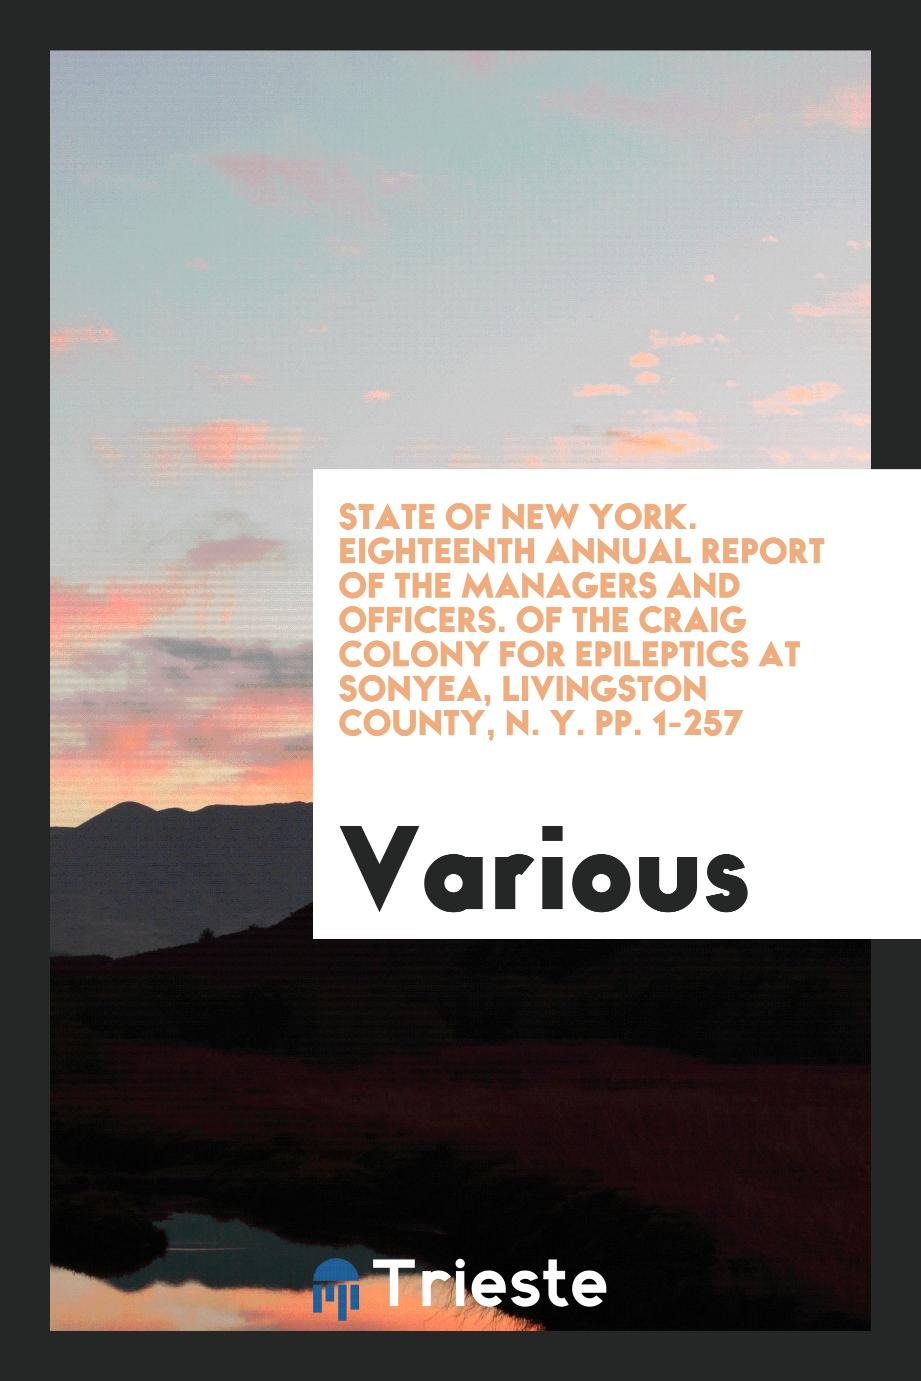 State of New York. Eighteenth Annual Report of the Managers and Officers. Of the Craig Colony for Epileptics at Sonyea, Livingston County, N. Y. pp. 1-257